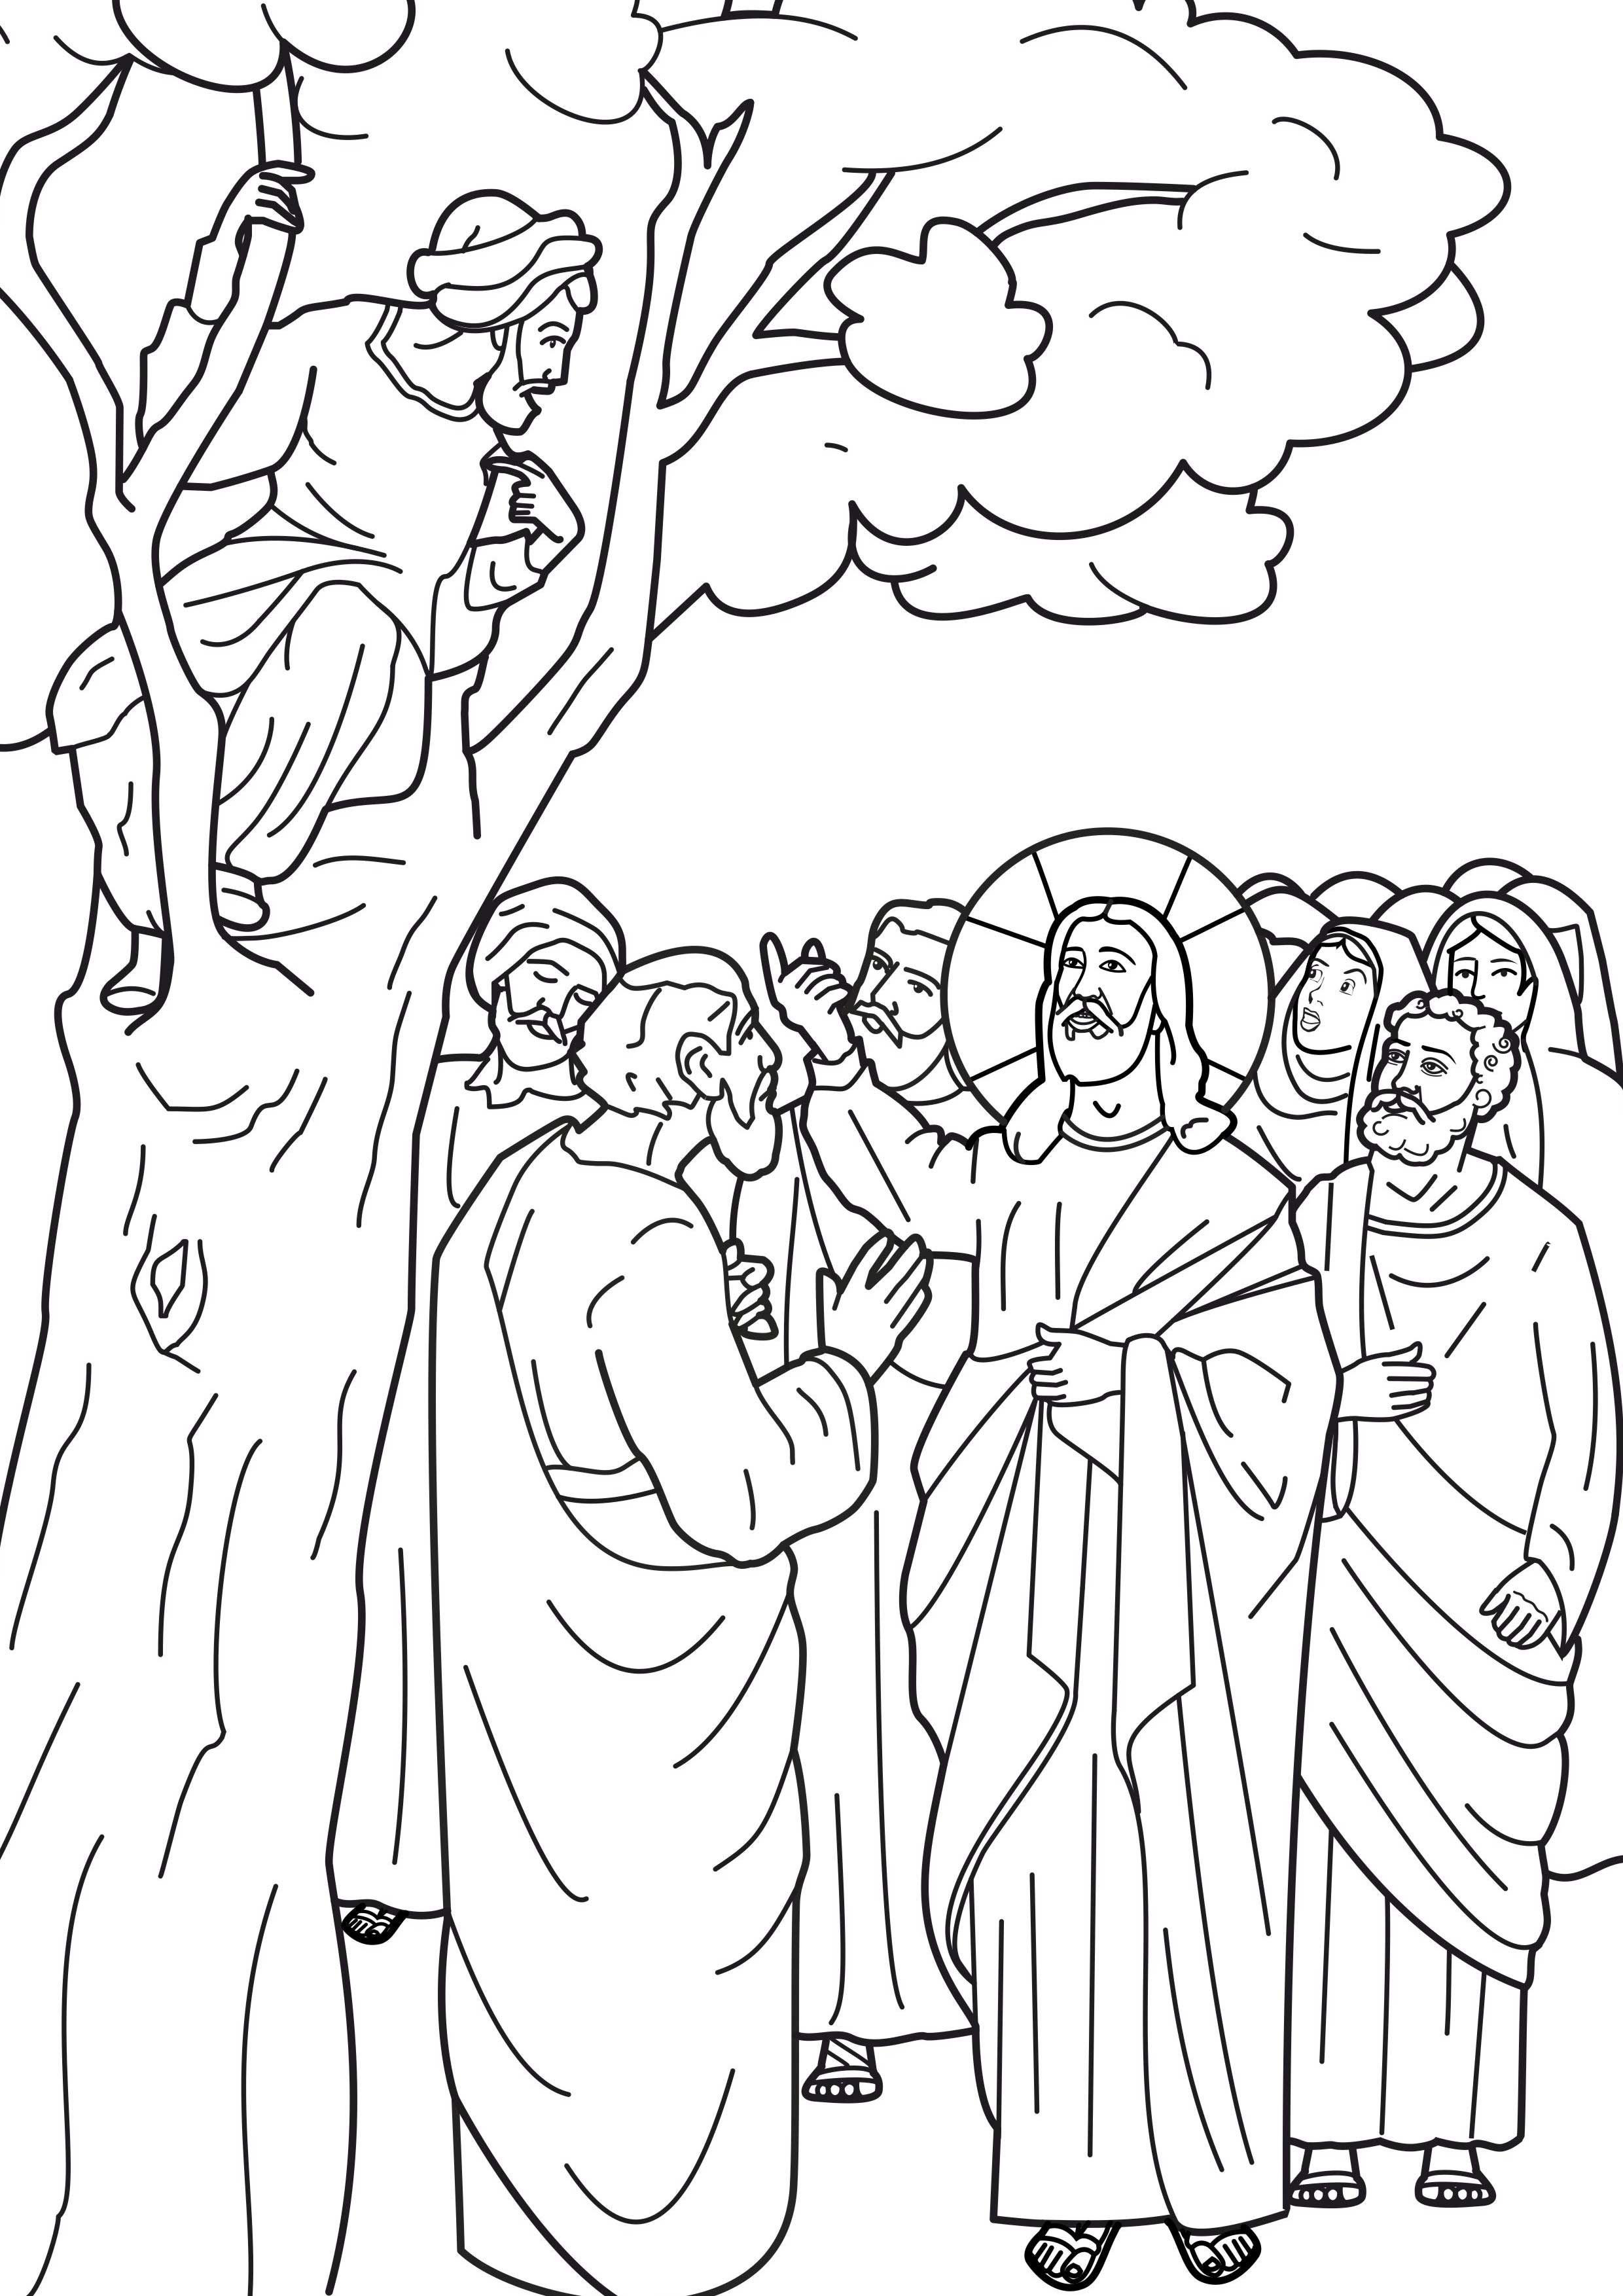 jesus and zacchaeus coloring pages. zacchaeus in a tree coloring ...